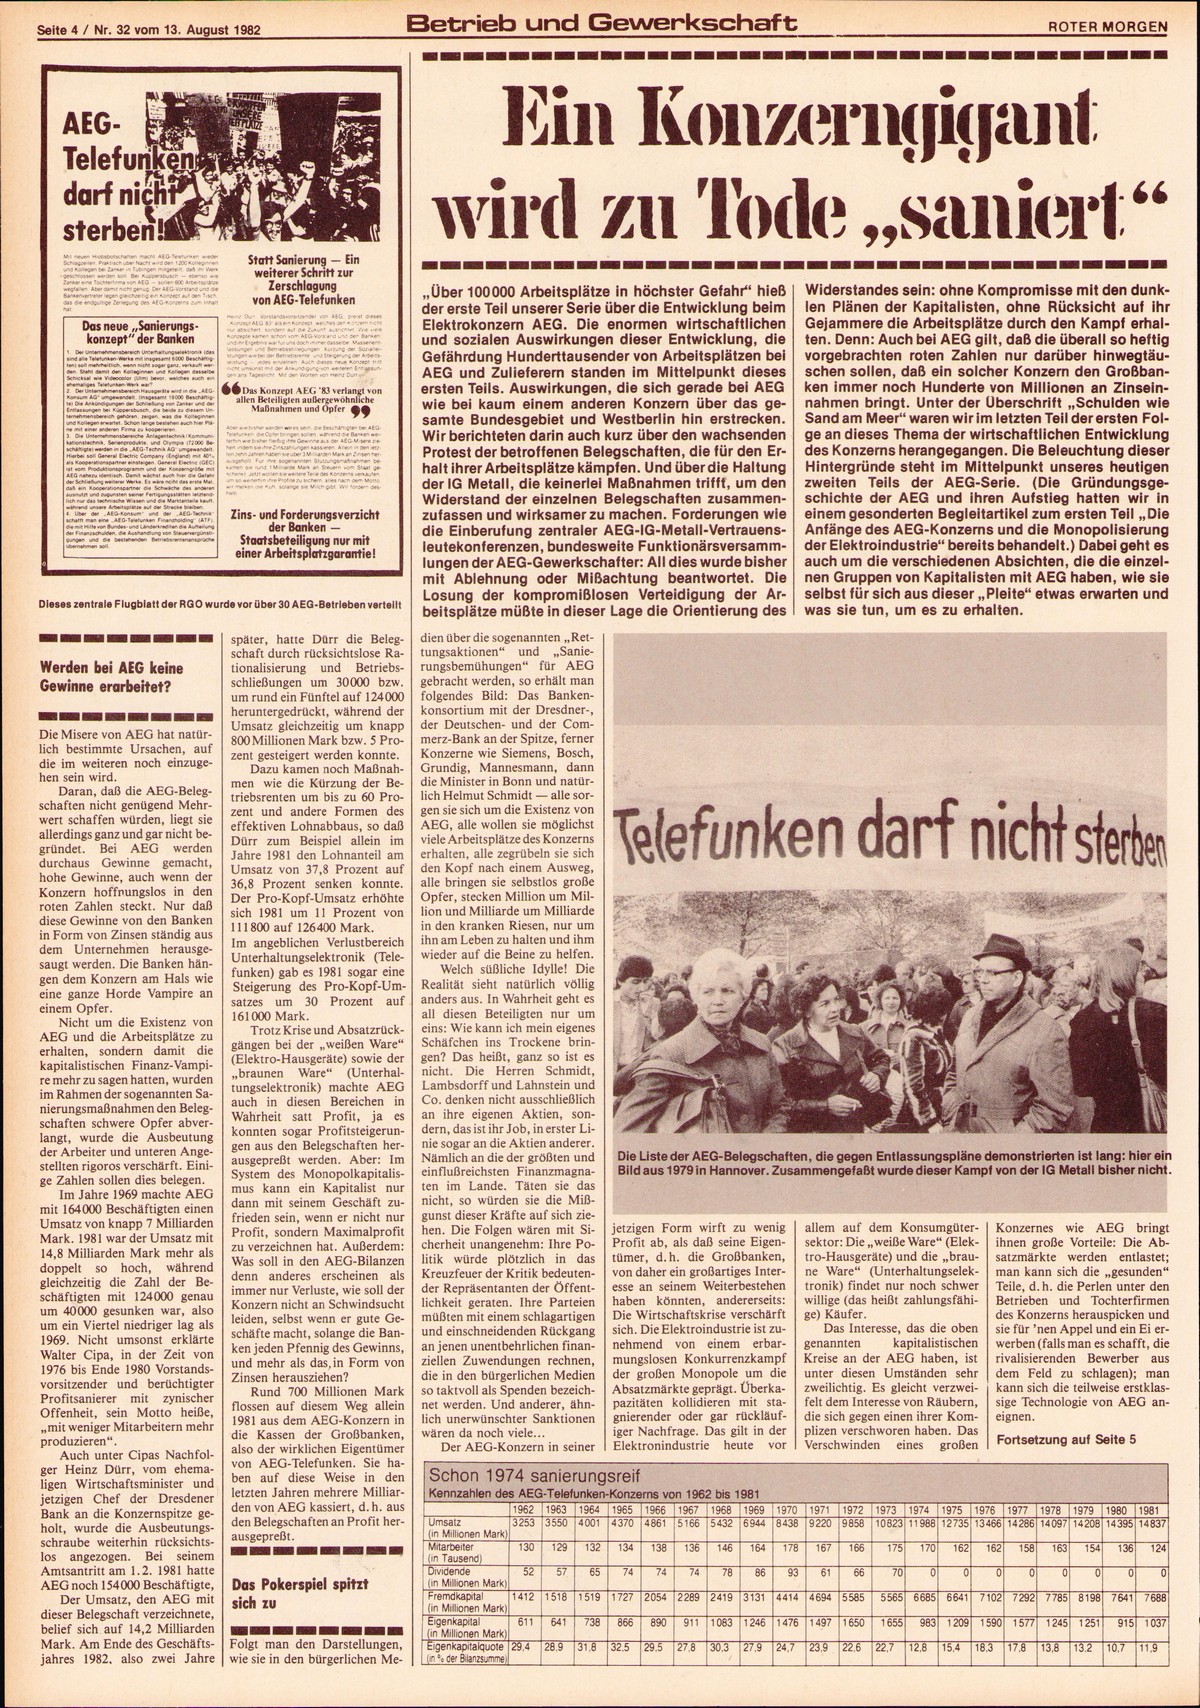 Roter Morgen, 16. Jg., 13. August 1982, Nr. 32, Seite 4